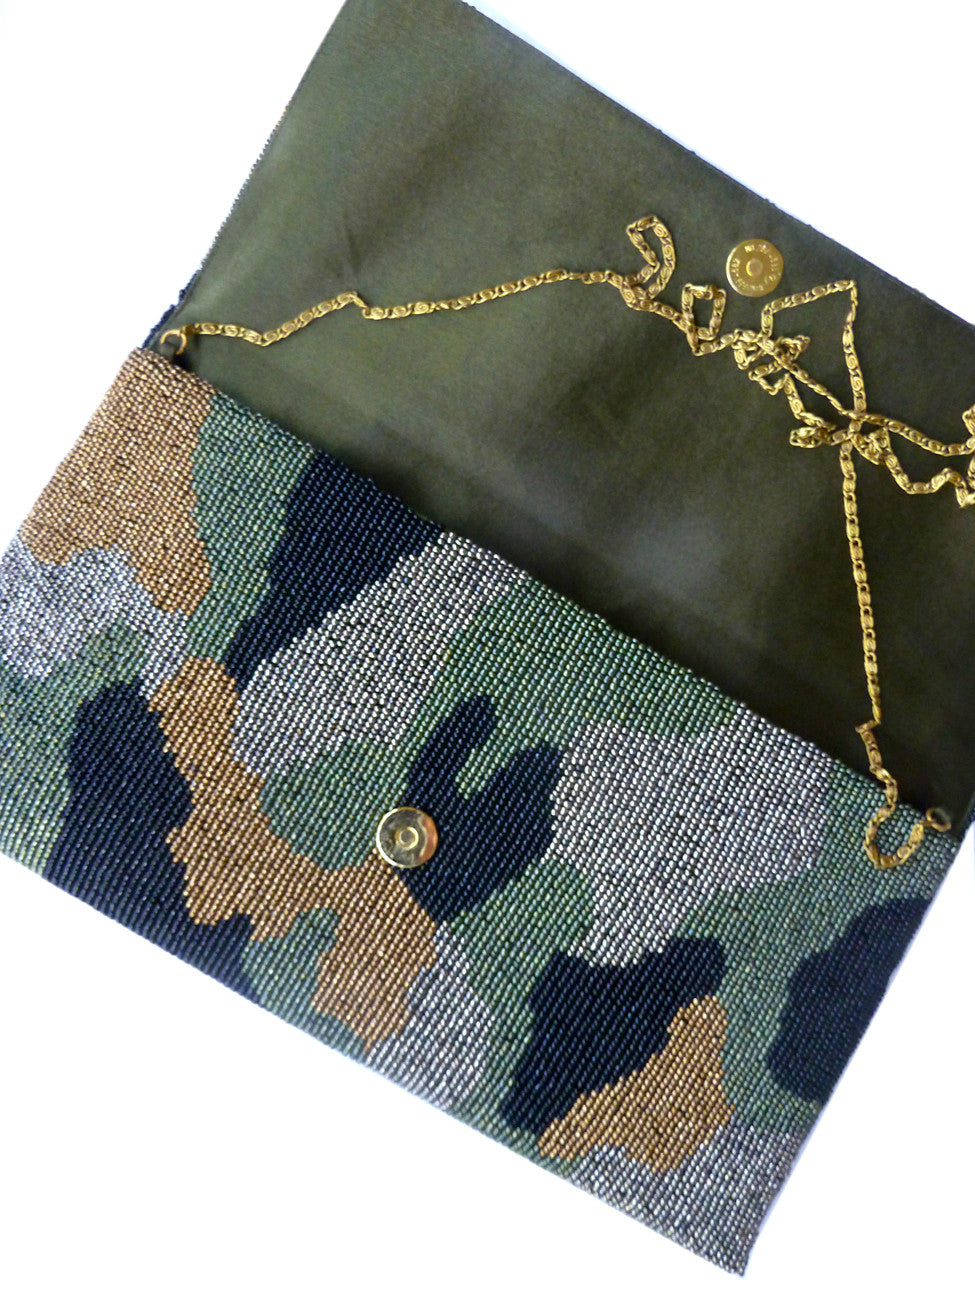 Beaded Large Envelope Clutch Bag Camouflage Turquoise